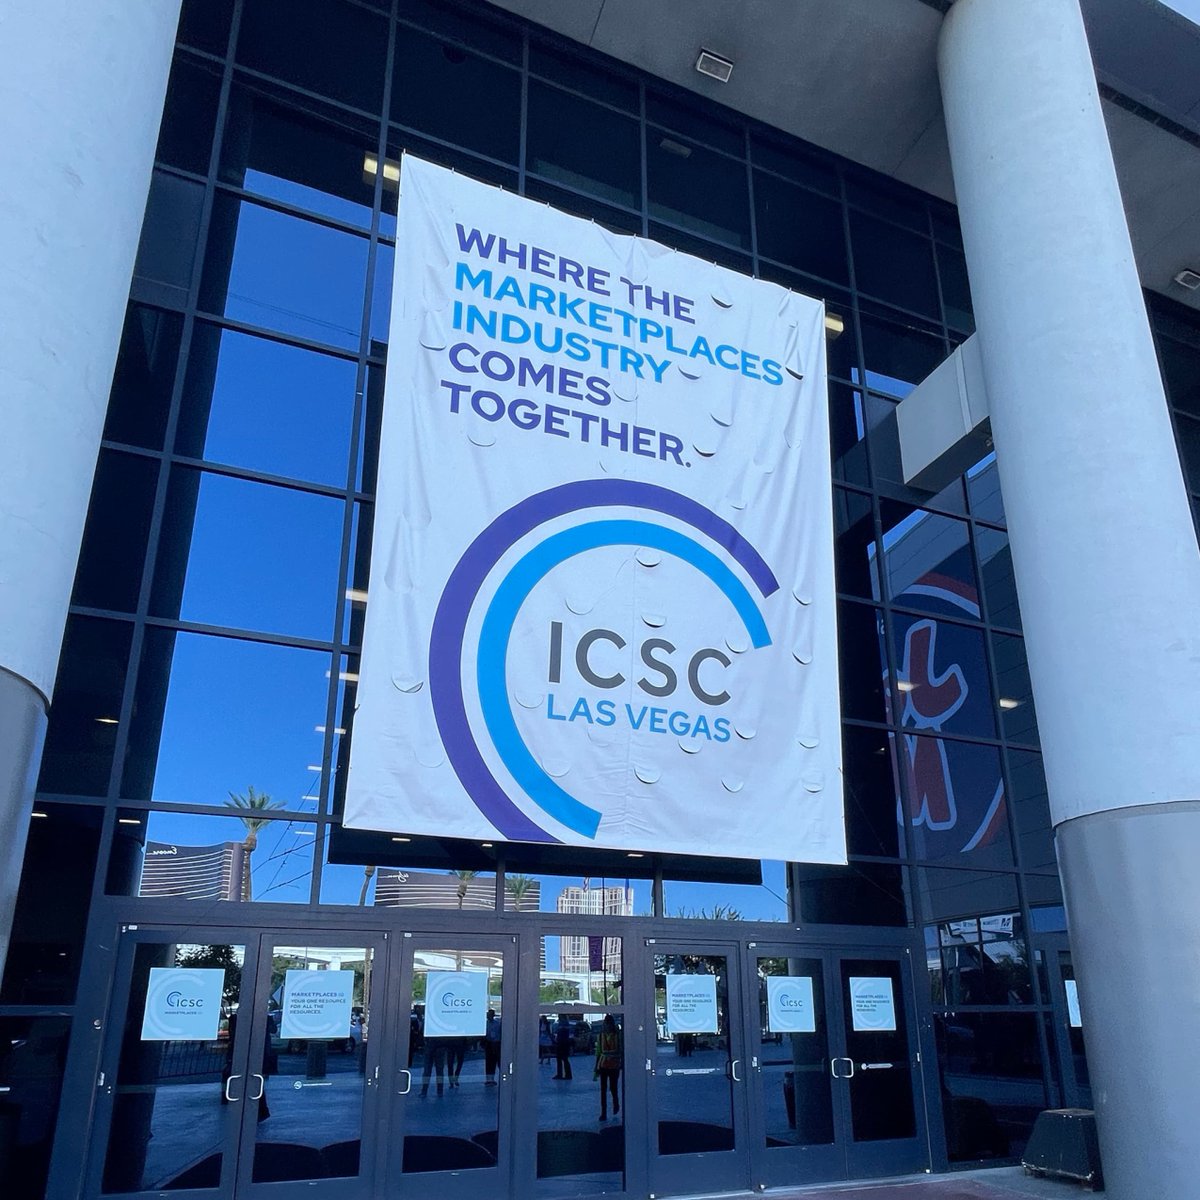 The Cincy Retail team is in Las Vegas at ICSC! Connect with Dustin, Connor, and Justin at the @Colliers booth. 

#ICSC2023 #ICSC #colliers #CRE #retail #shoppingcenters #commercialrealestate #lasvegas